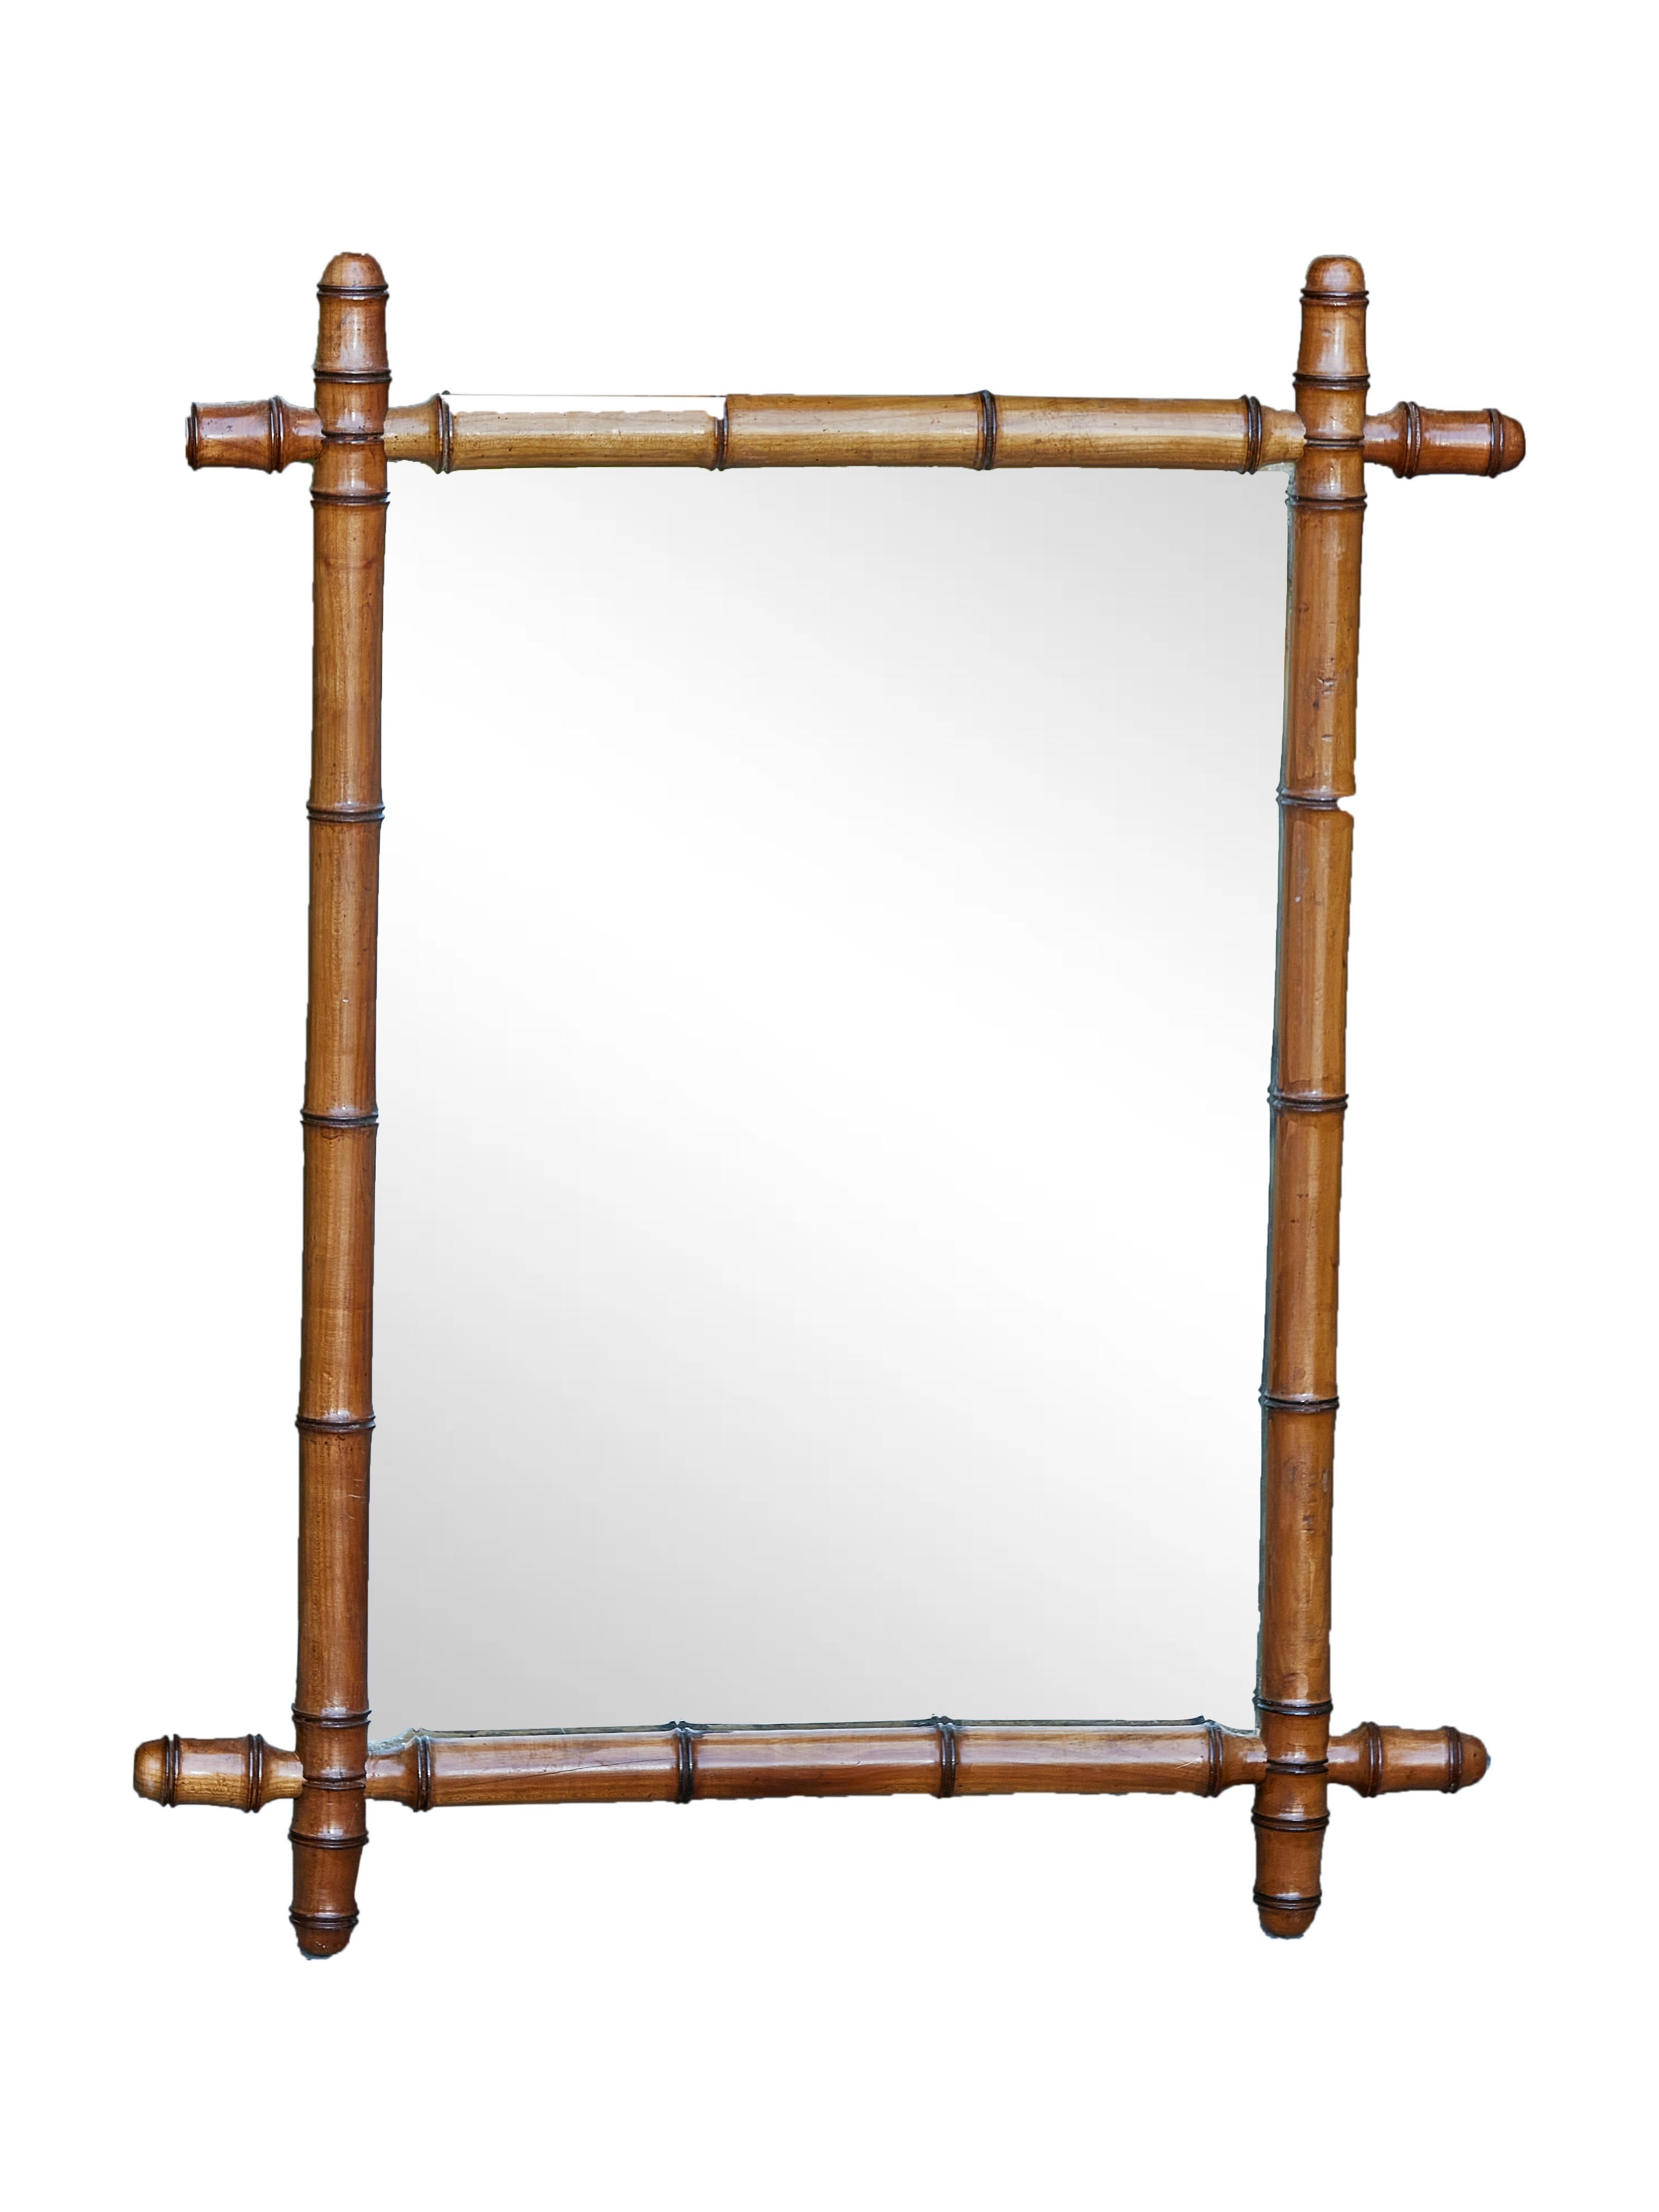 A small French faux-bamboo 1920s mirror made of walnut with intersecting corners, reeded accents and rustic character. Embrace the allure of the Roaring Twenties with this dainty French faux-bamboo mirror from the 1920s, a decorative gem that speaks